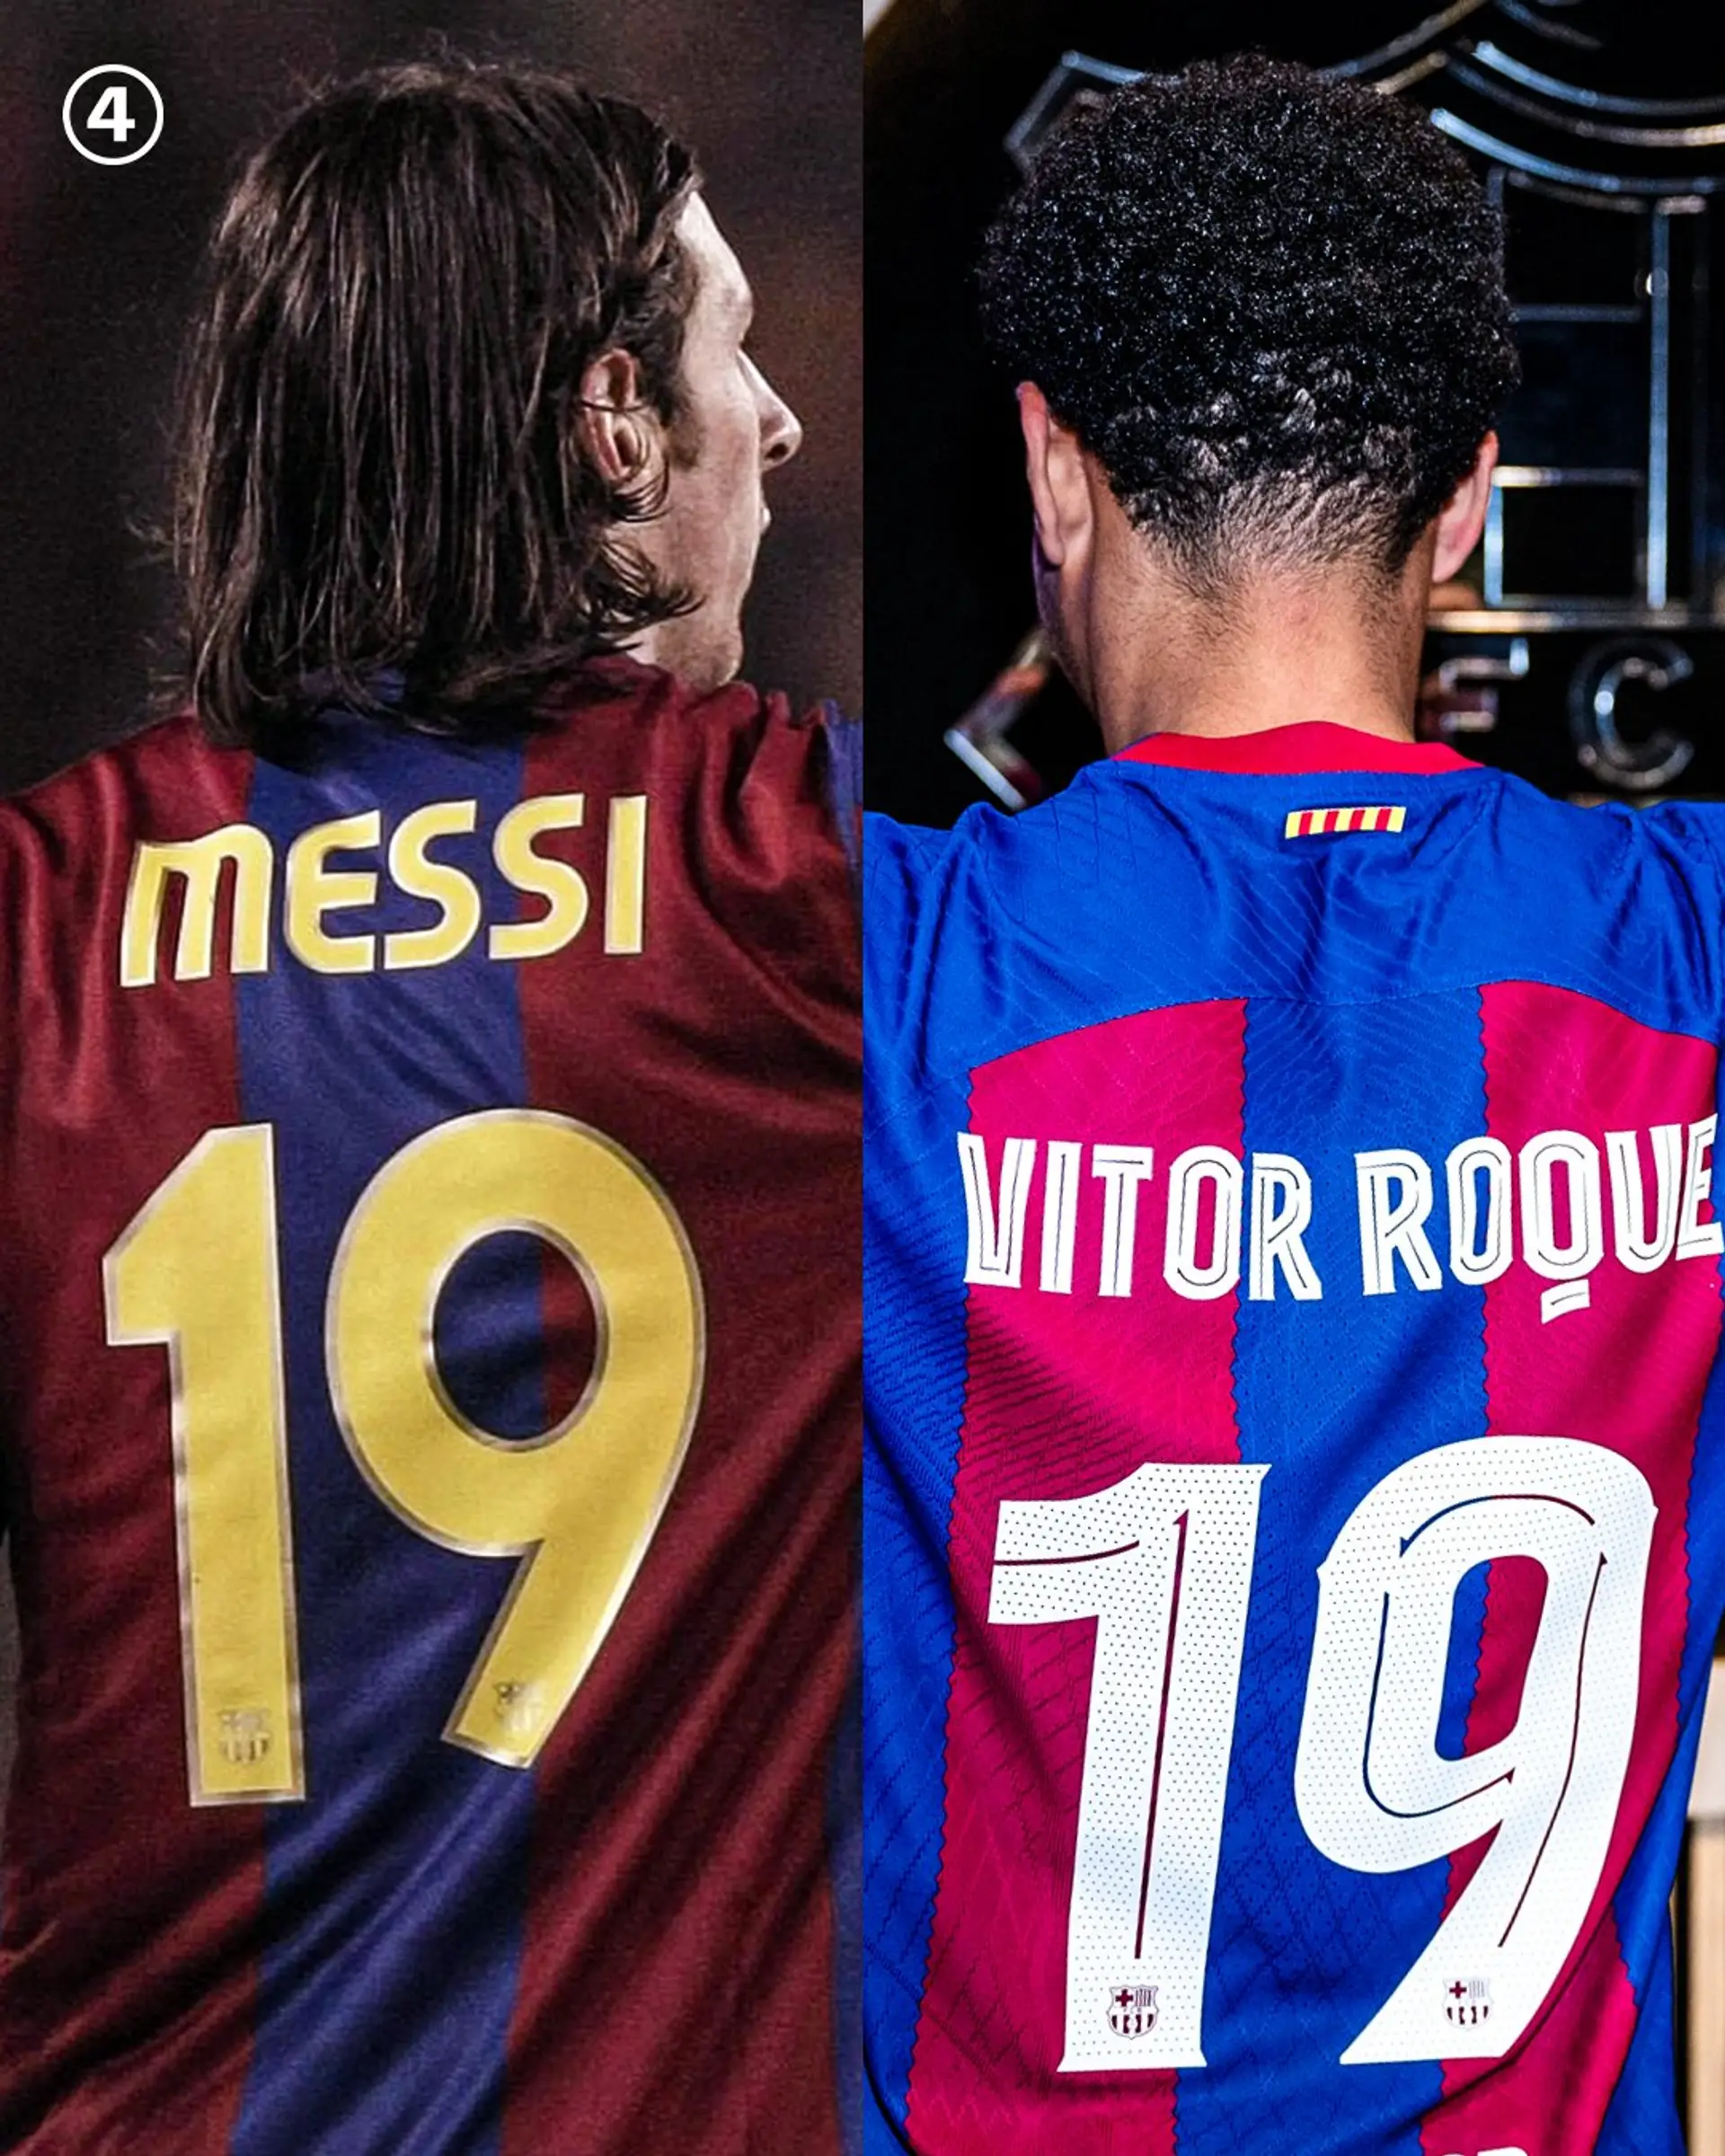 Following in Messi's footsteps 1️⃣9️⃣ 😎